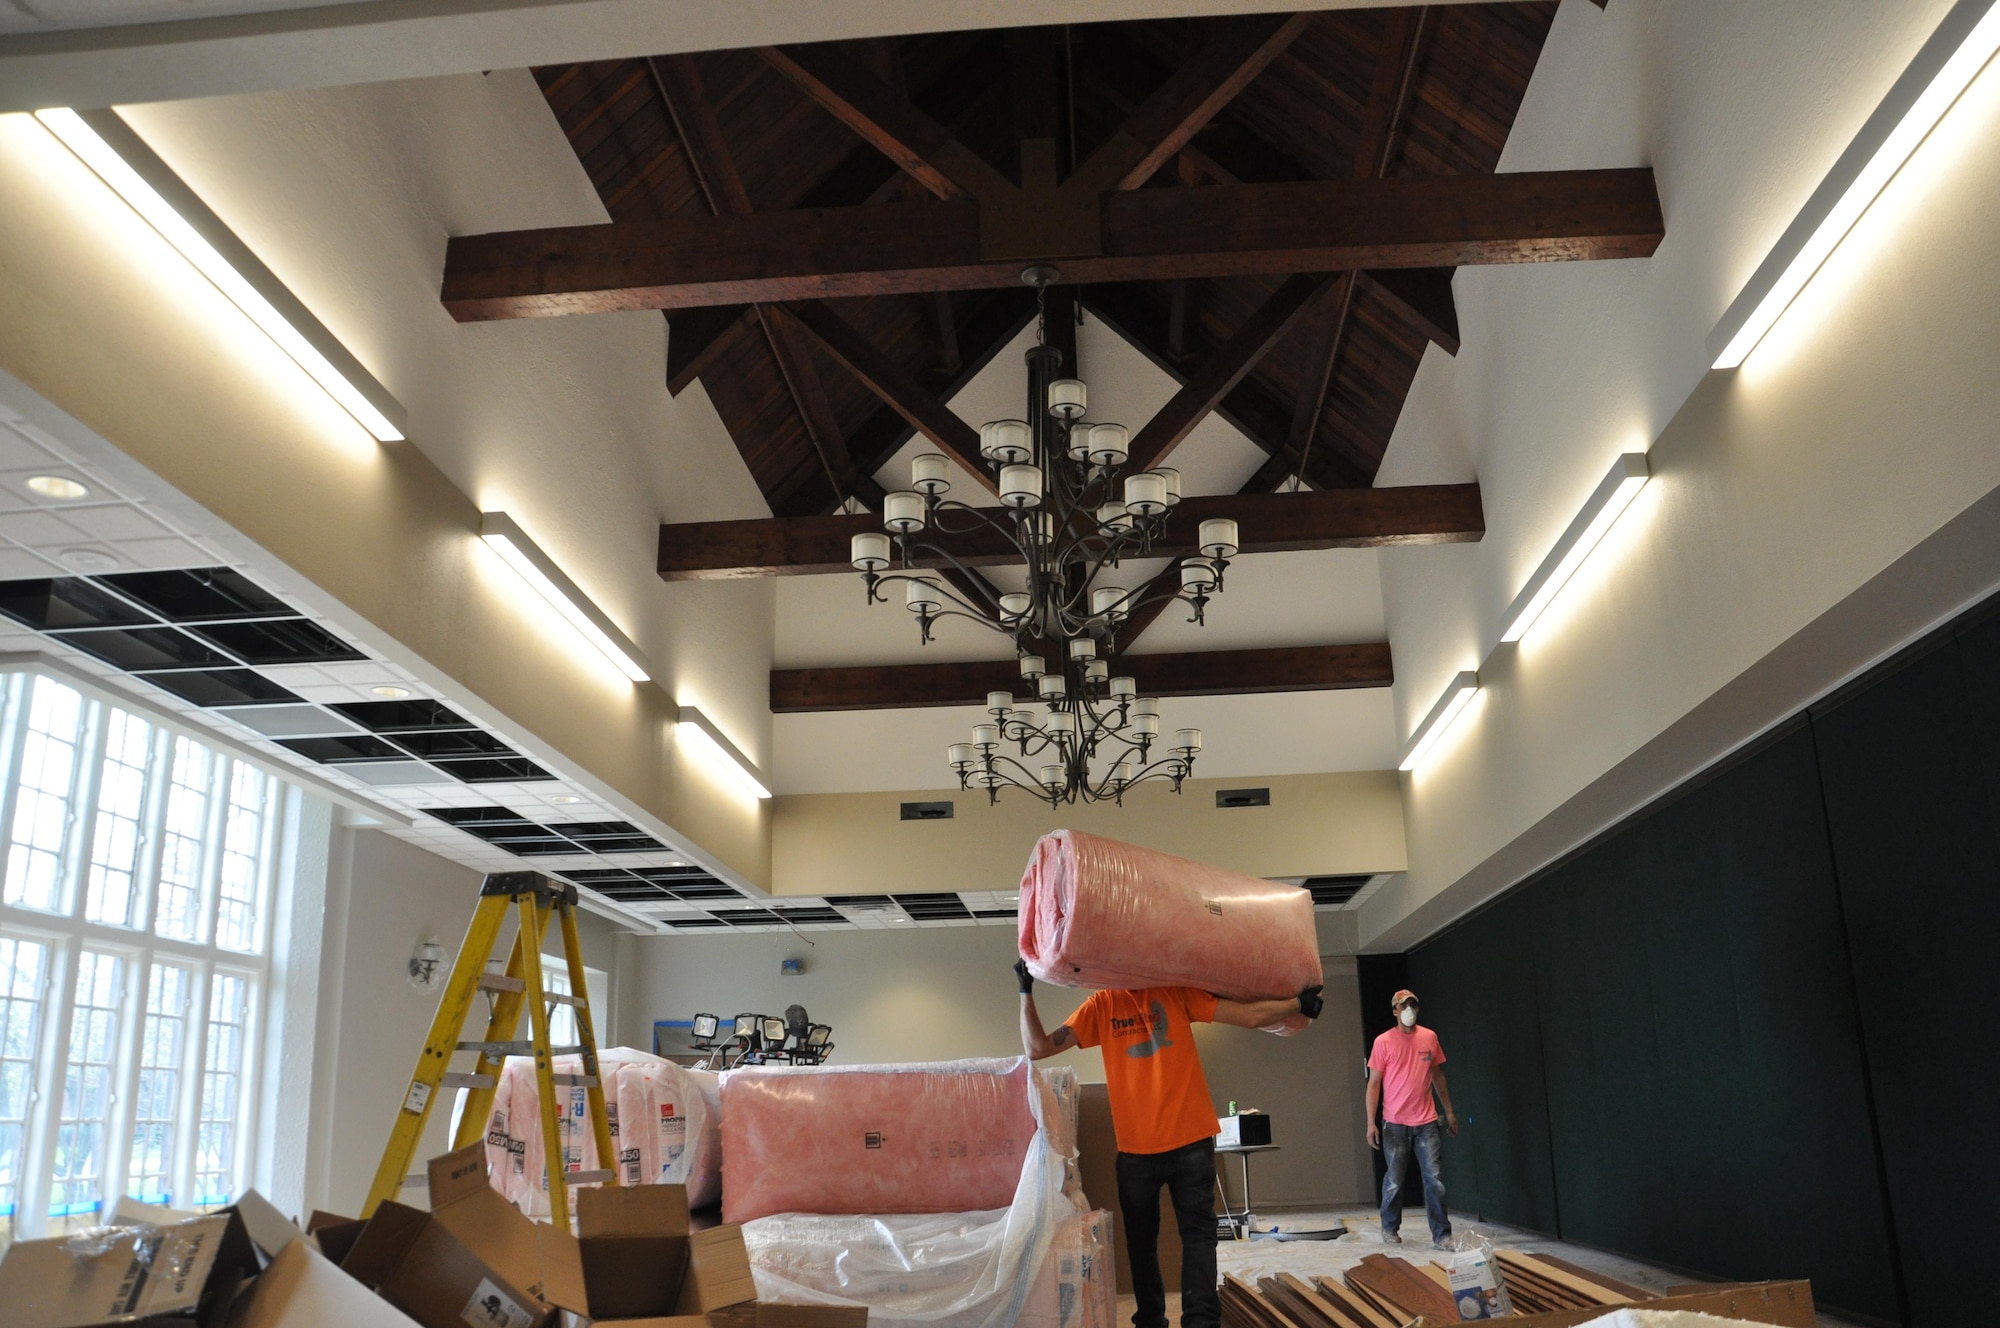 Construction workers move insulation in the Daedallion Room at the Wright-Patterson Club on April 10, 2017. During renovations, workers found wooden crossbeams that were part of the original construction of the club in the 1920s. Construction was halted after the find, and it was found they were structurally sound and could remain exposed.  The beams only required oiling to return them to their original state. Era-appropriate chandeliers were installed to make this the centerpiece of the room. The Daedallion, main ballroom and the Bicycle Room, which closed for renovations in December 2016, are all scheduled to reopen in late May 2017.  (U.S. Air Force photo/Jim Mitchell)